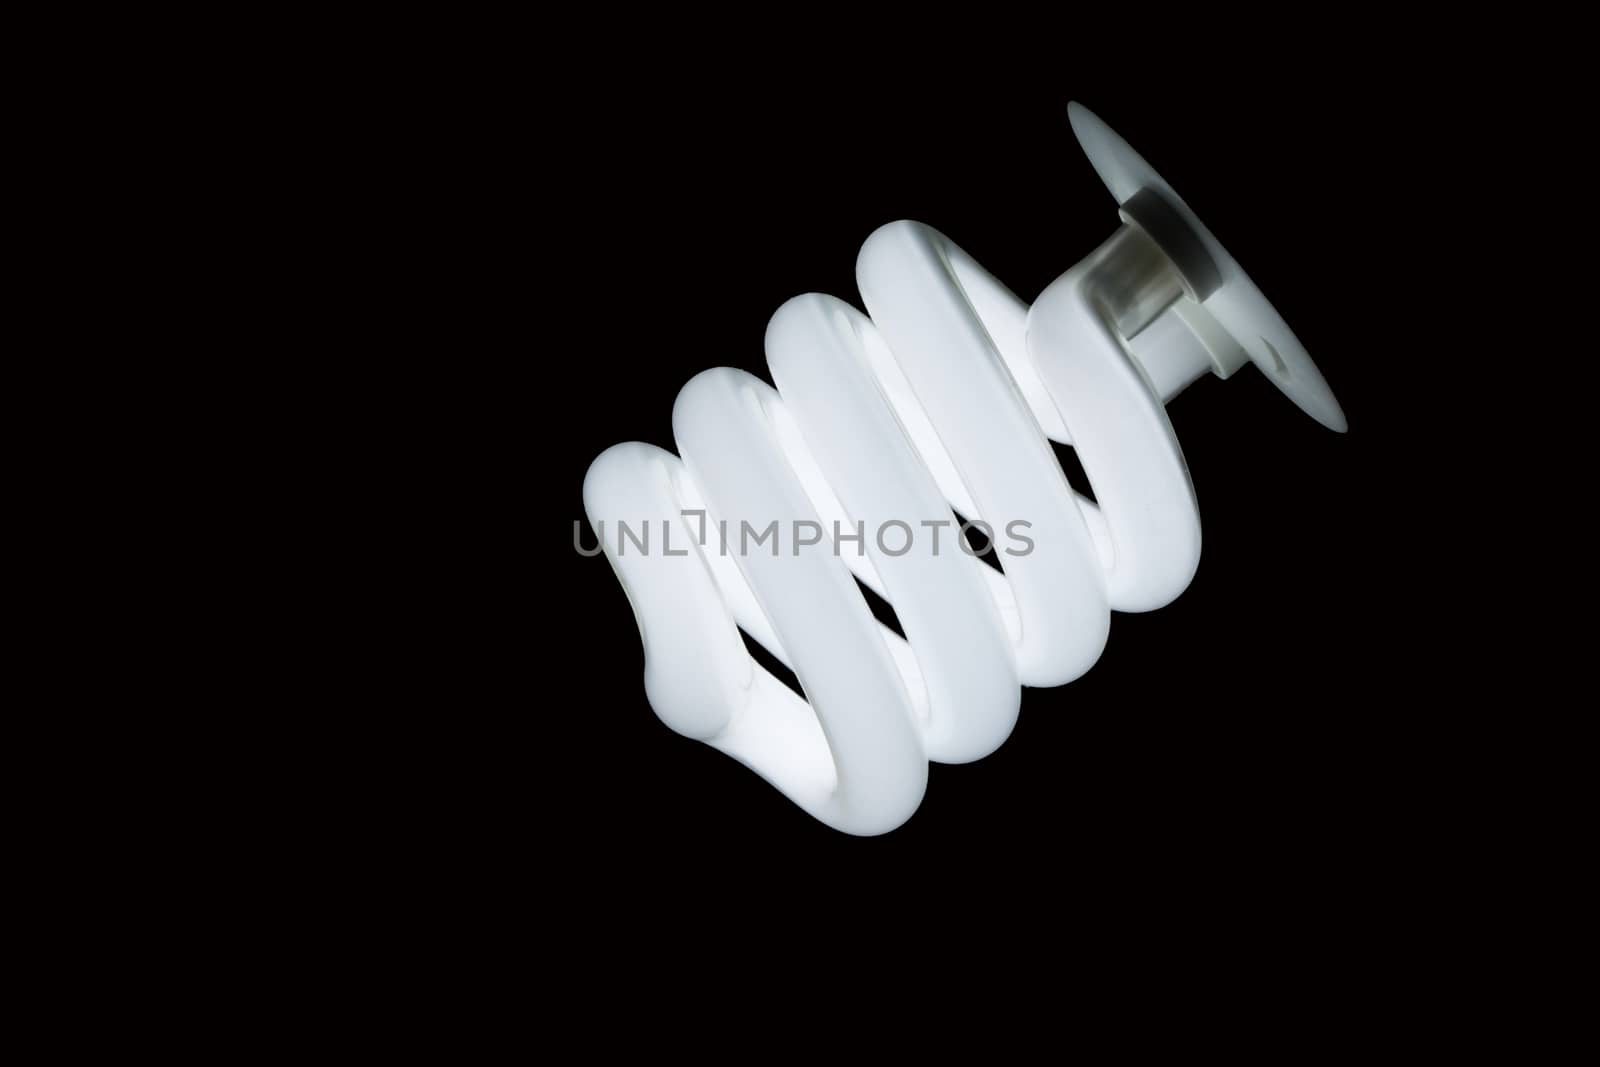 Glowing Spiral CFL Lamp isolated against Black background in diagonal composition